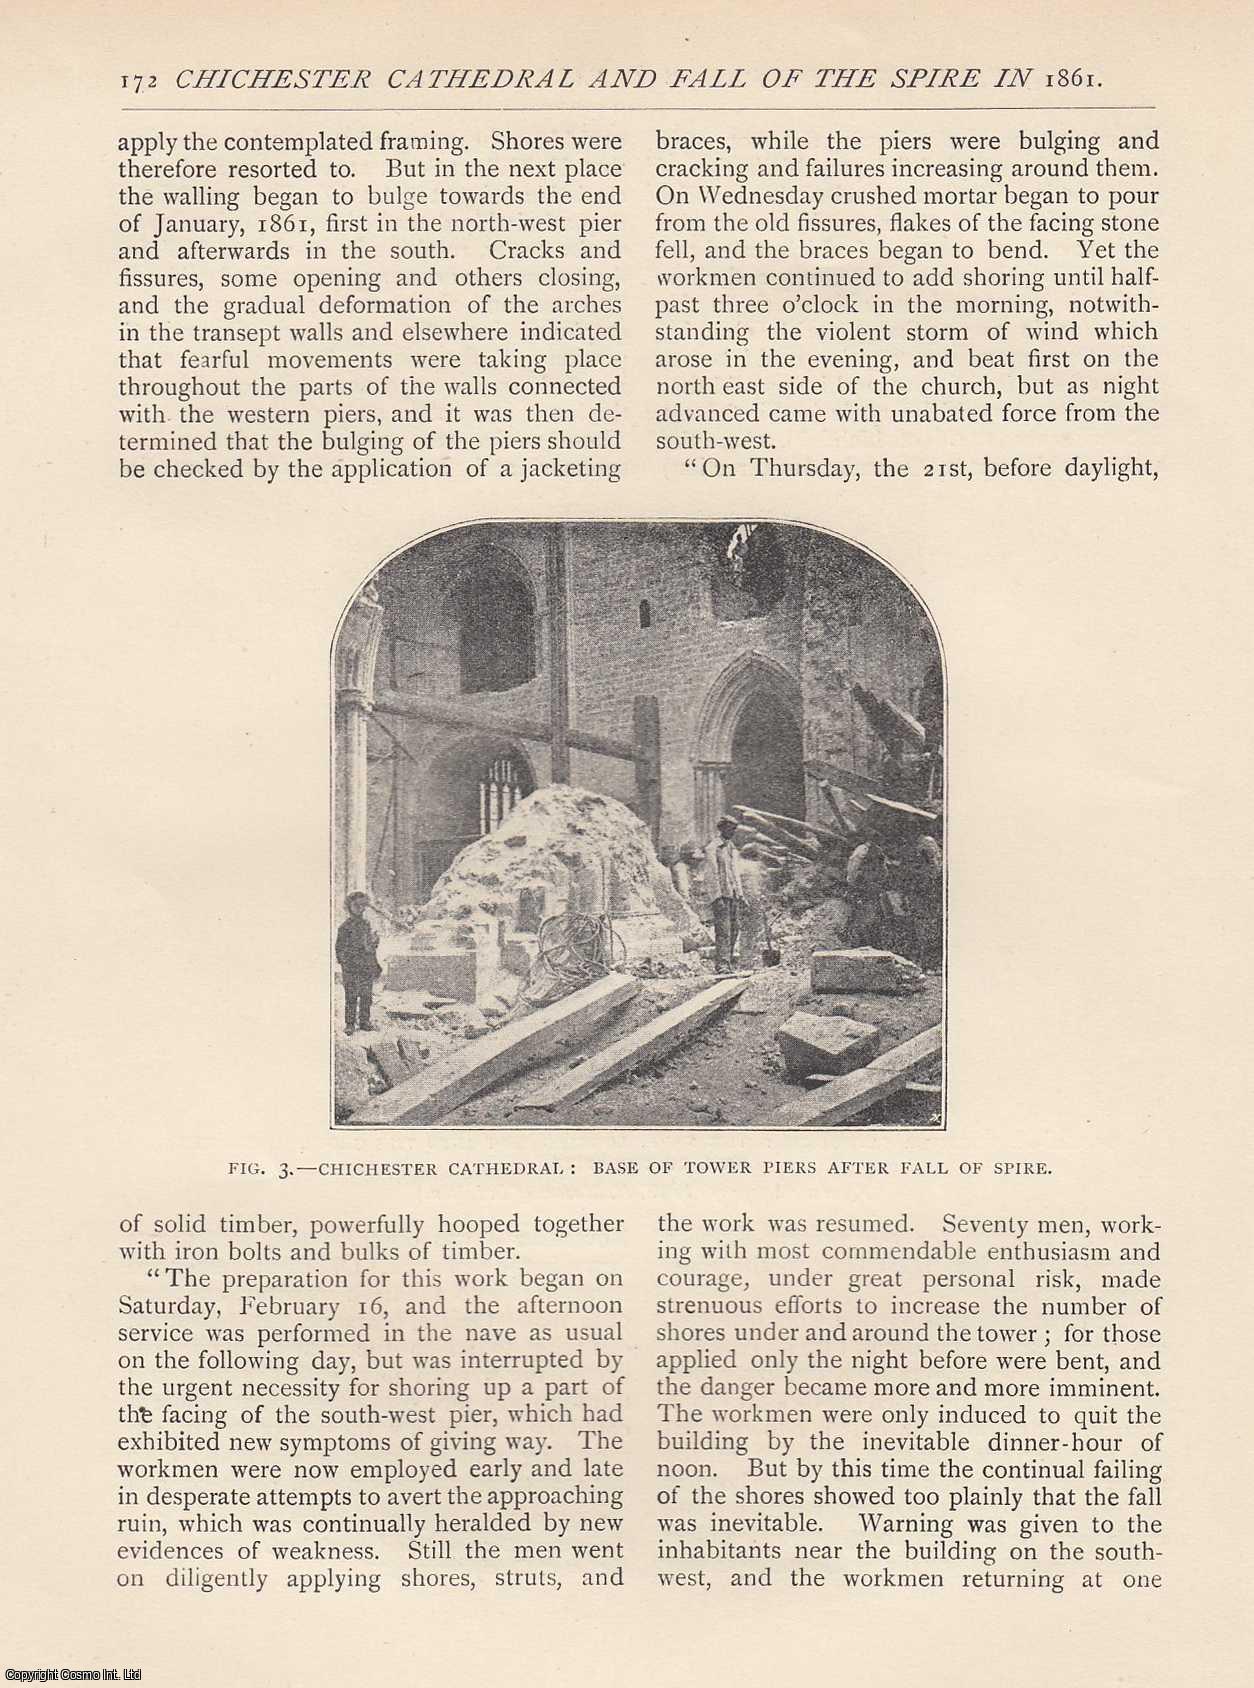 No Author Stated - Chichester Cathedral and The Fall of The Spire in 1861. An original article from The Antiquary Magazine, 1896.